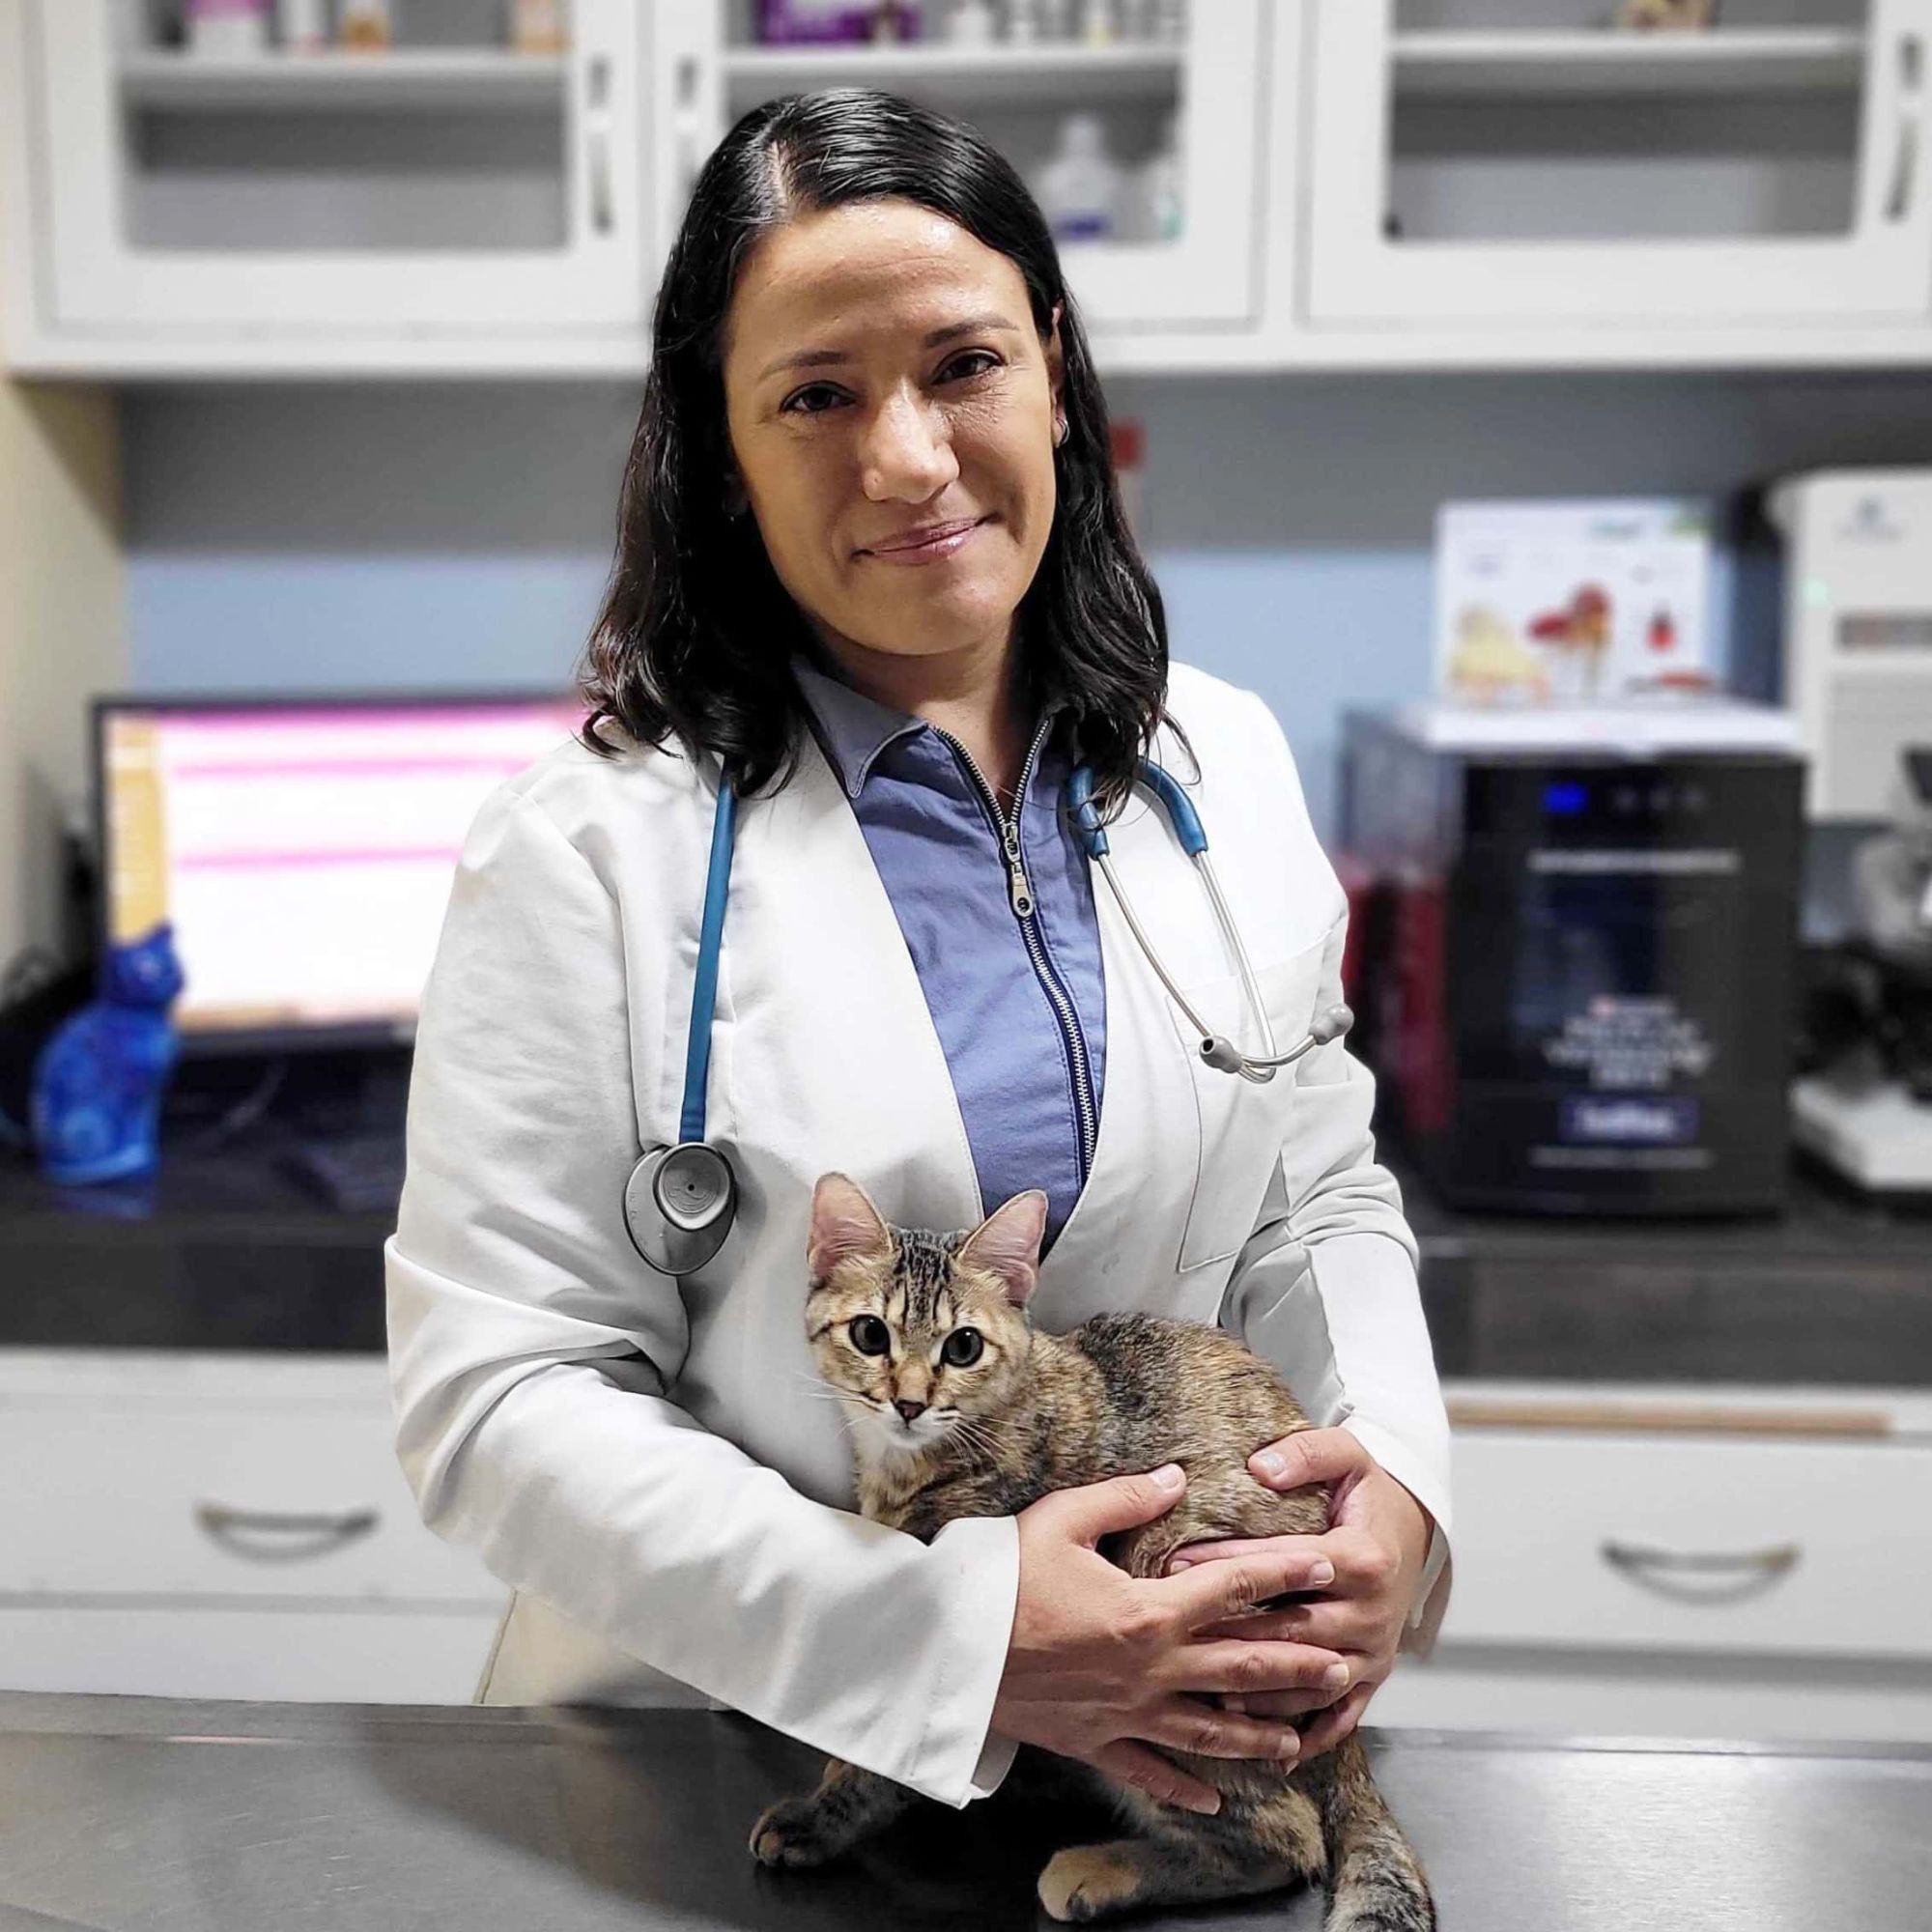 A picture of Dr. Paola Cuevas holding a cat.